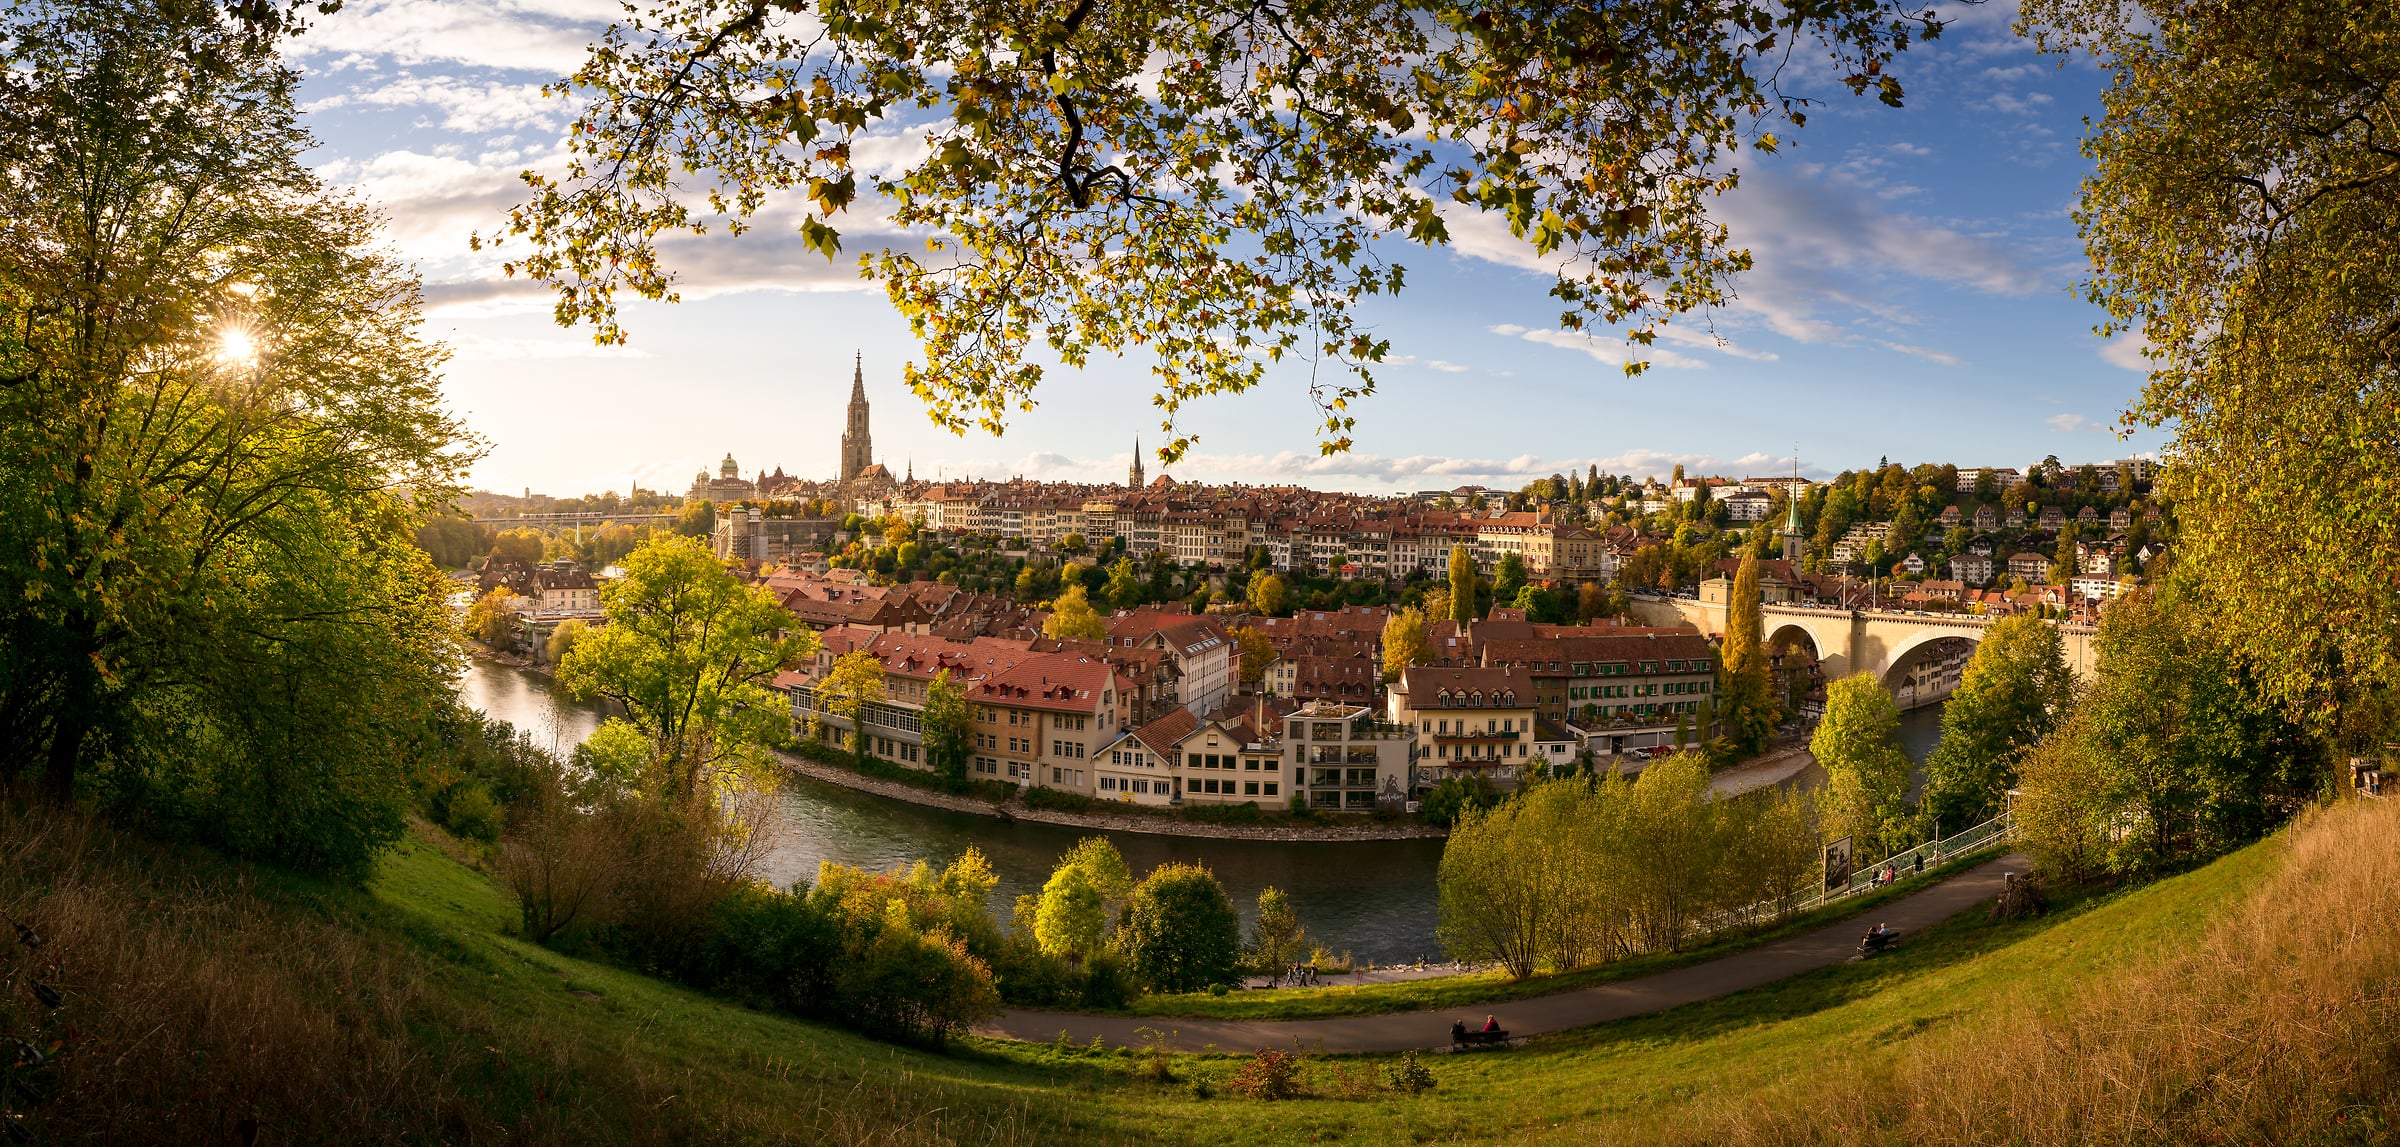 164 megapixels! A very high resolution, large-format VAST photo print of a quaint European city on a river on a warm afternoon; photograph created by Jeff Lewis in Bern, Switzerland.